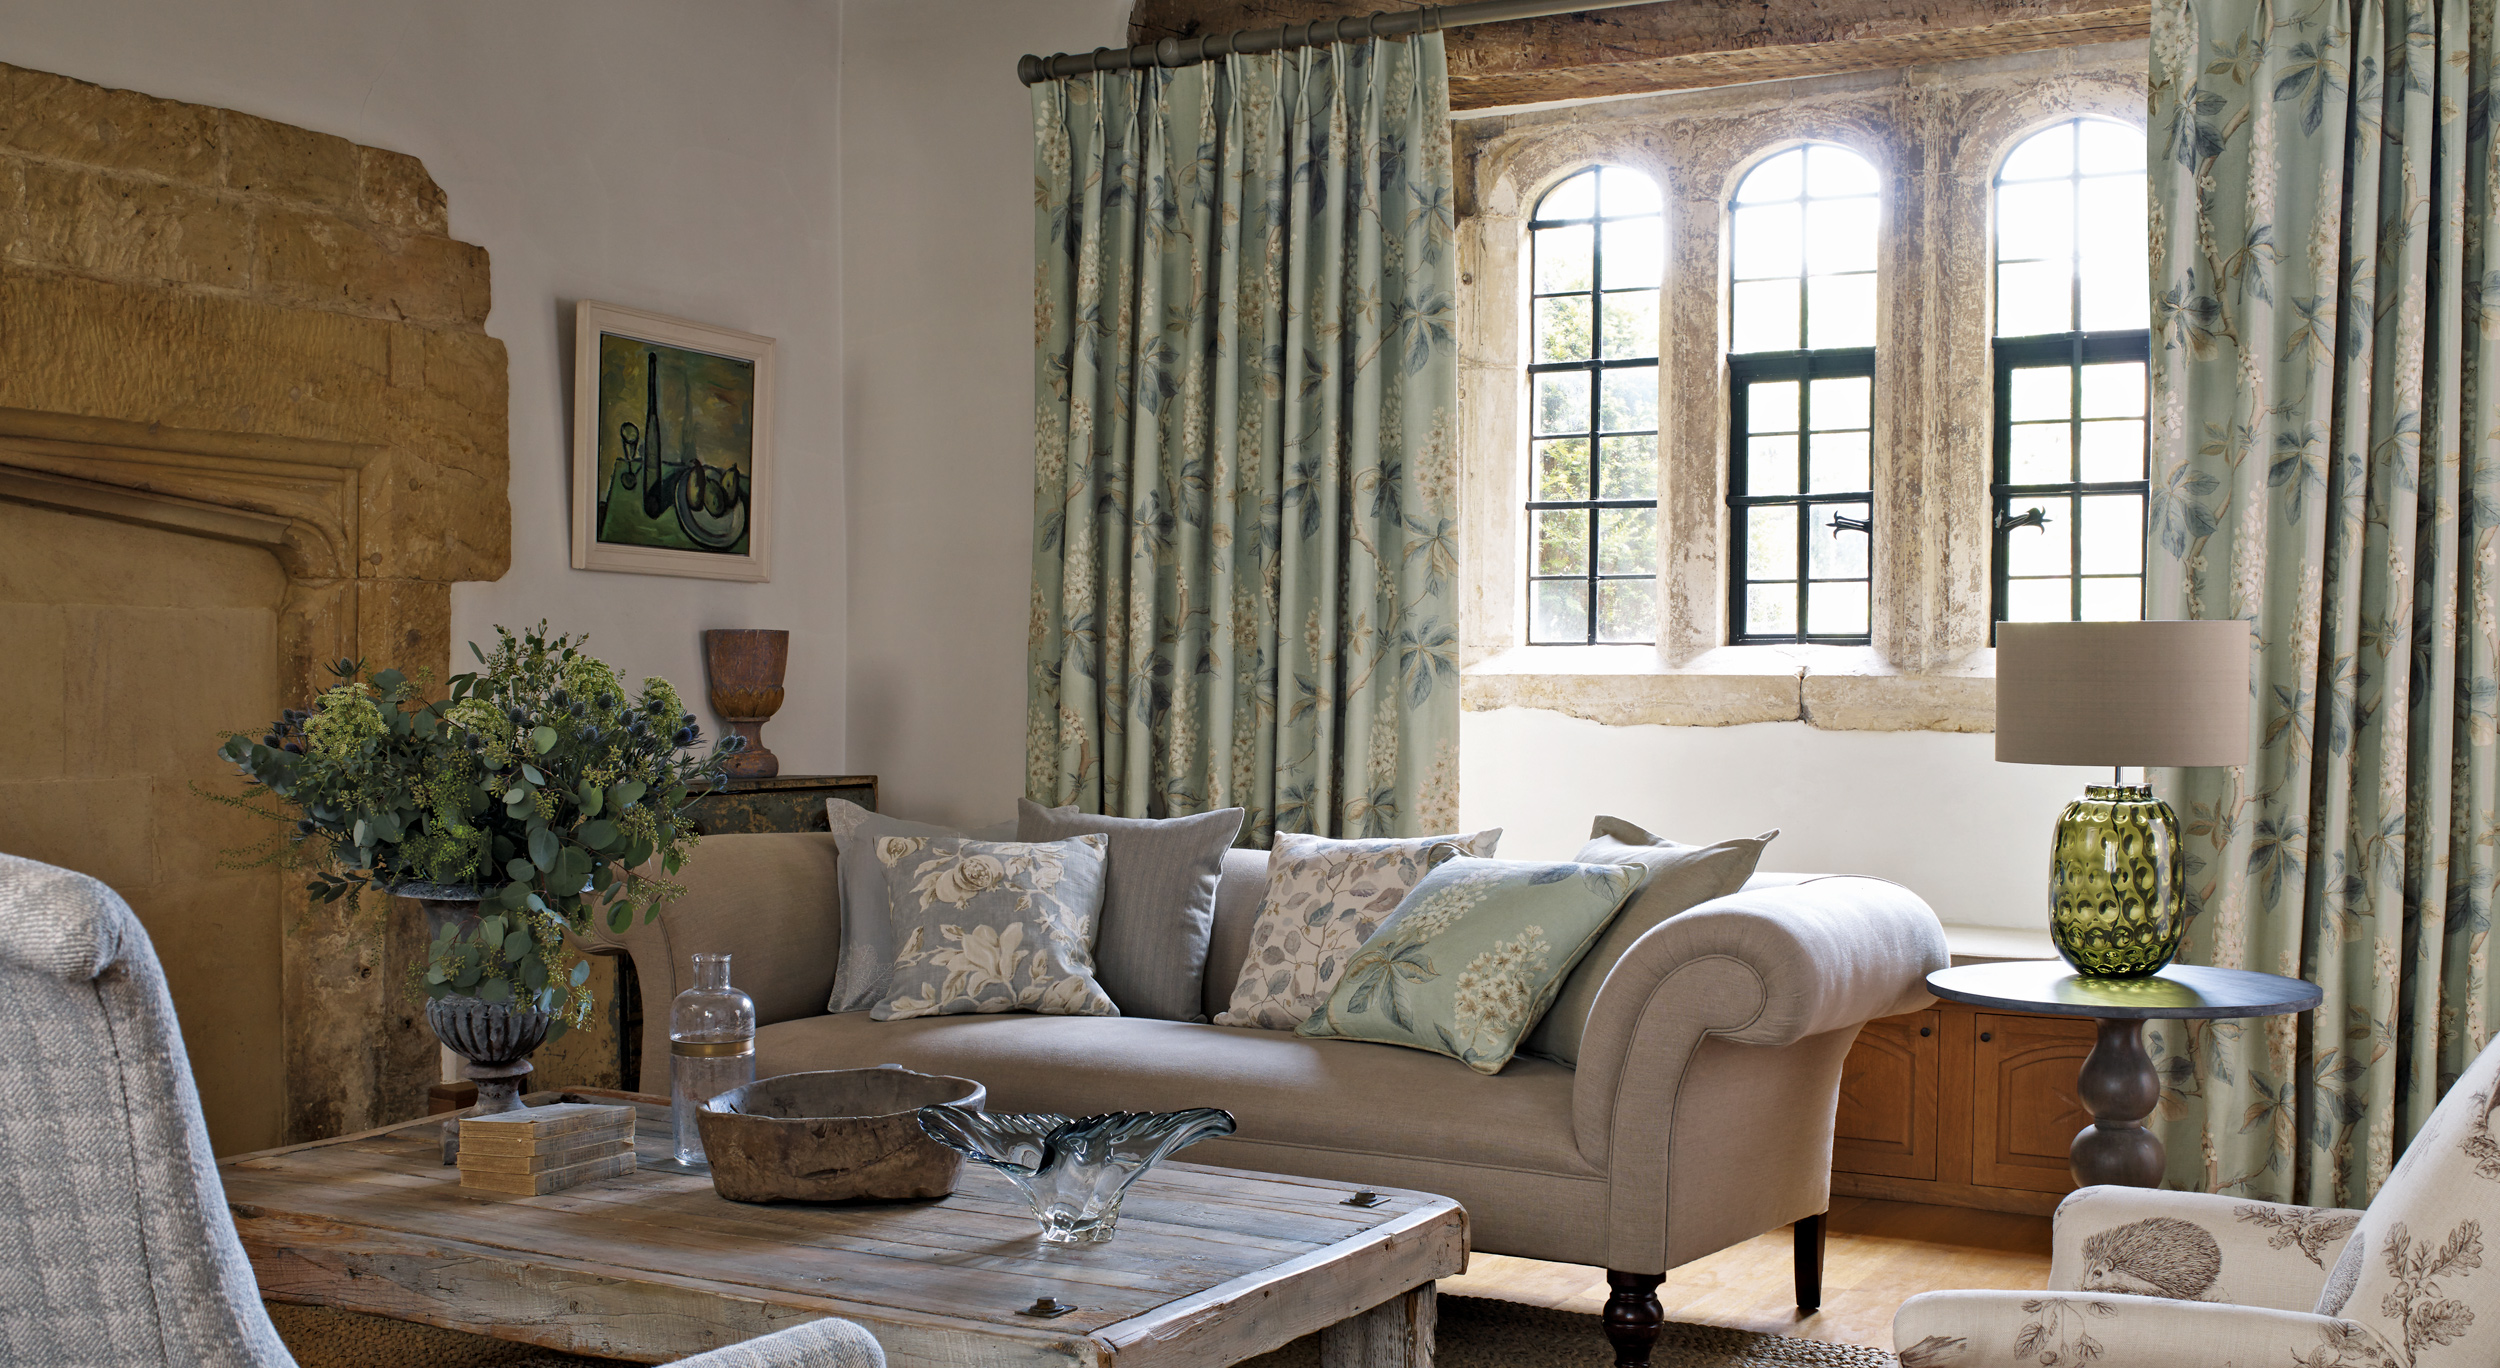 Made to measure curtains from designer suppliers in Sussex, Surrey and London